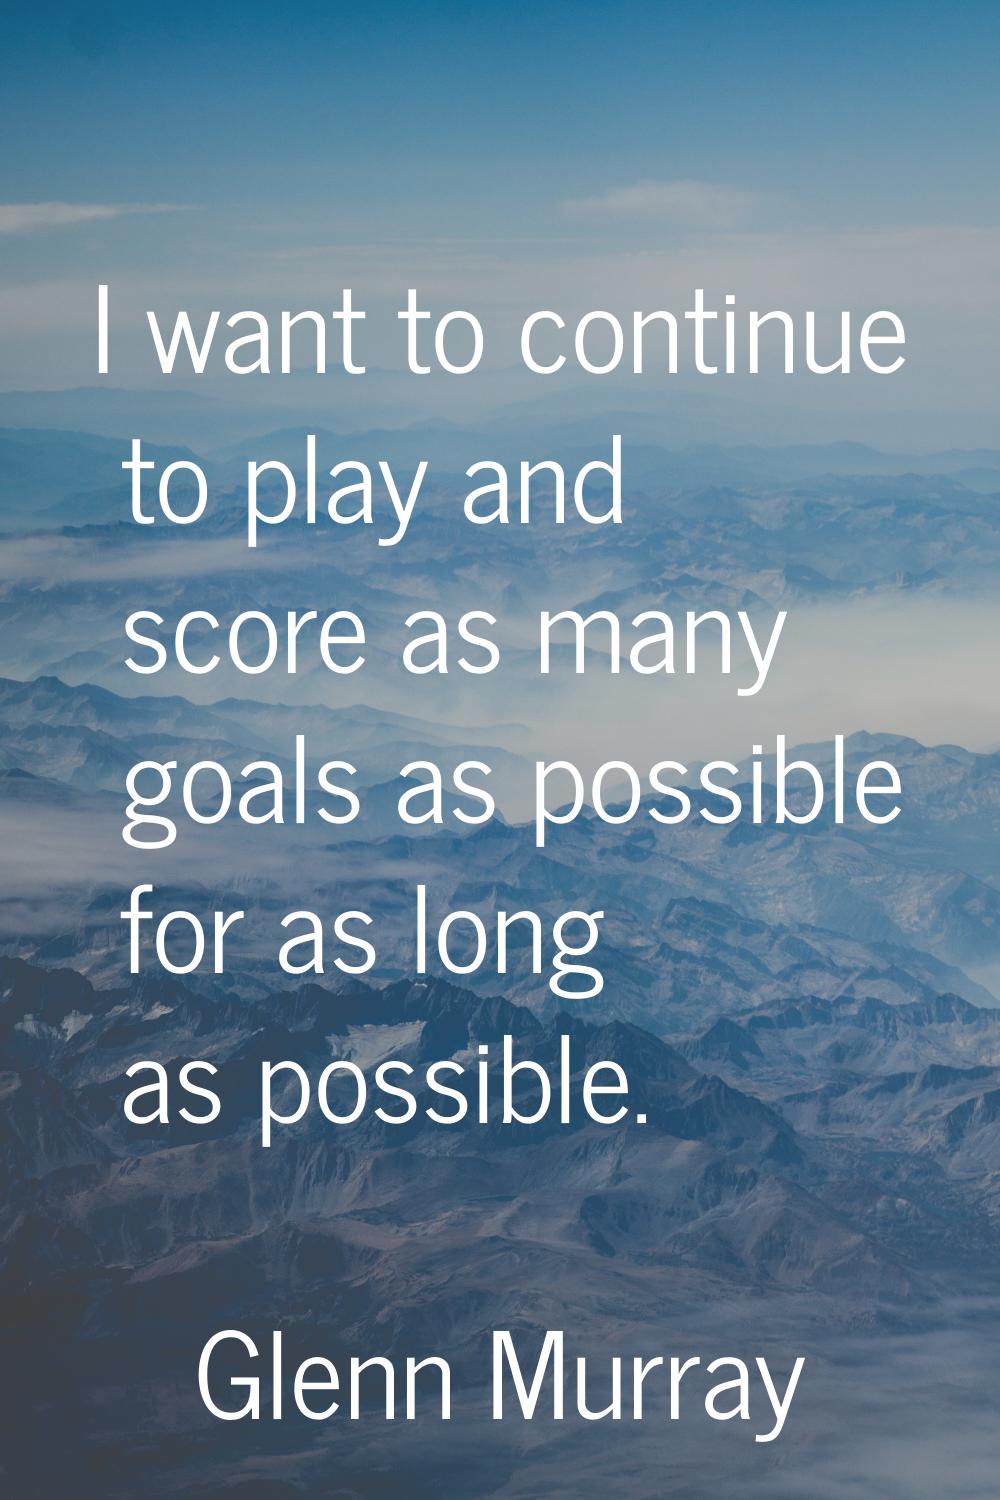 I want to continue to play and score as many goals as possible for as long as possible.